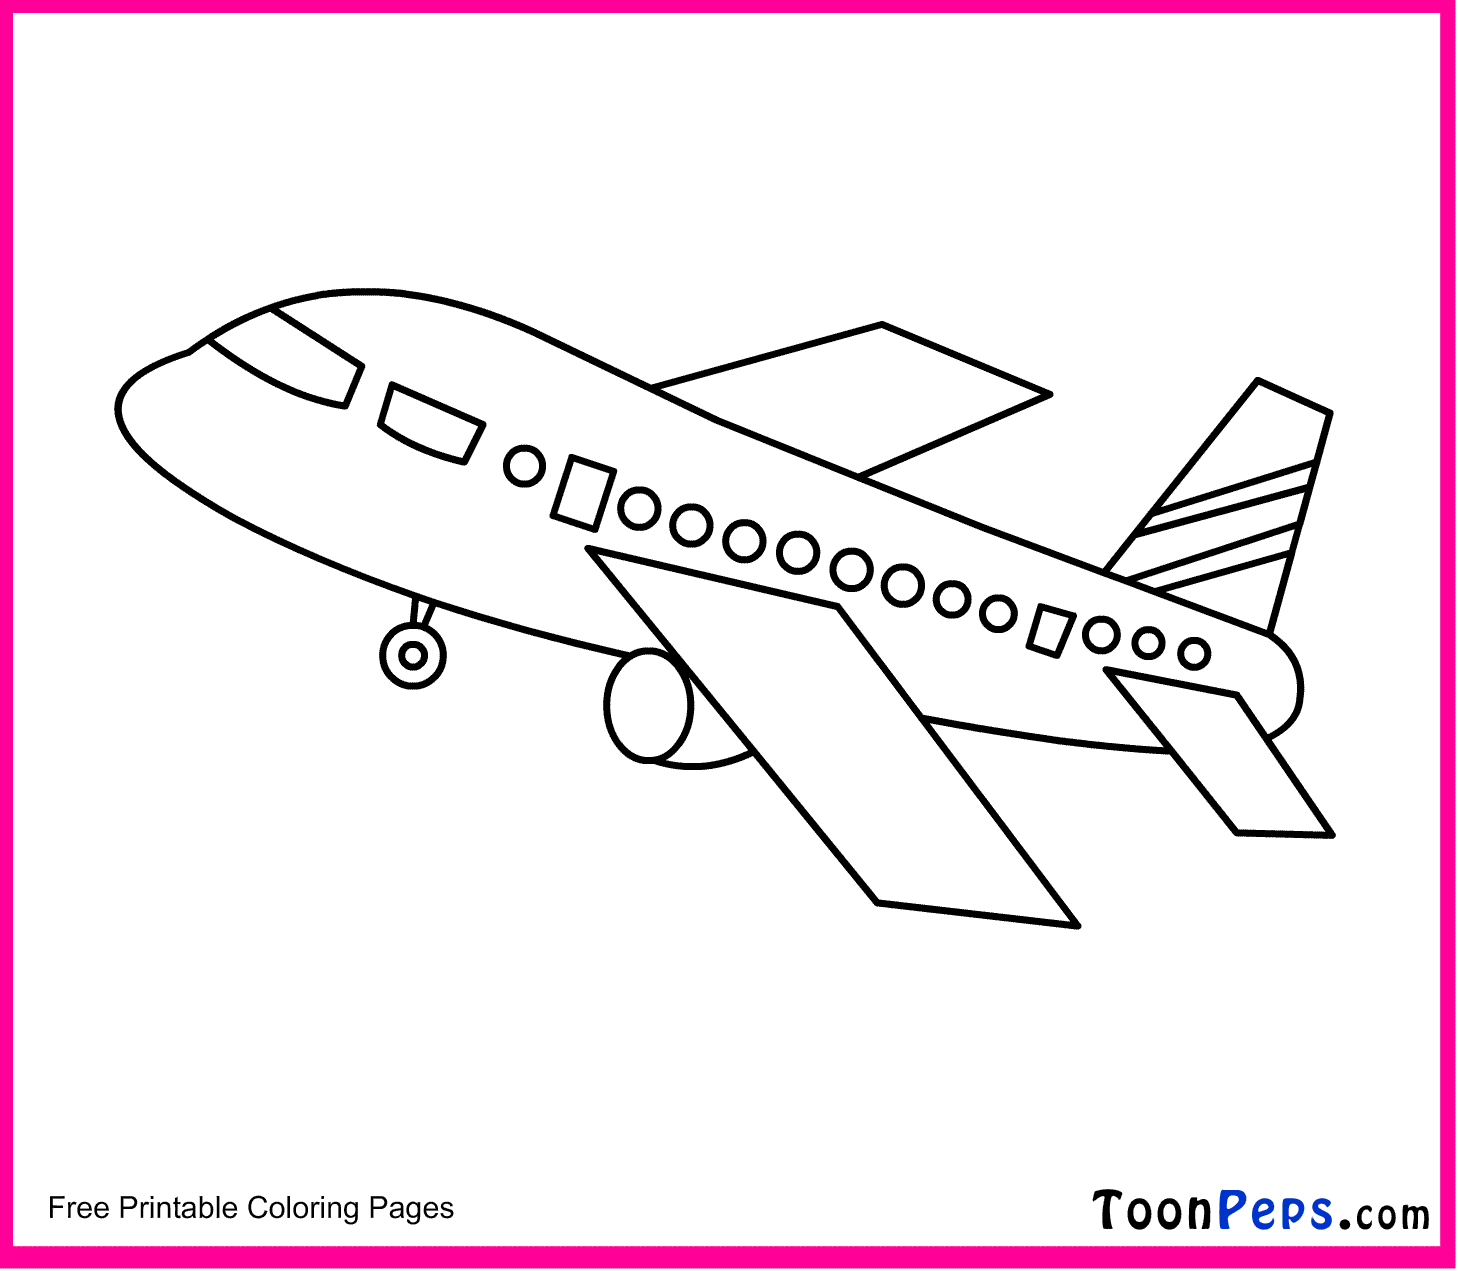 wide-body aircraft - Clip Art Library